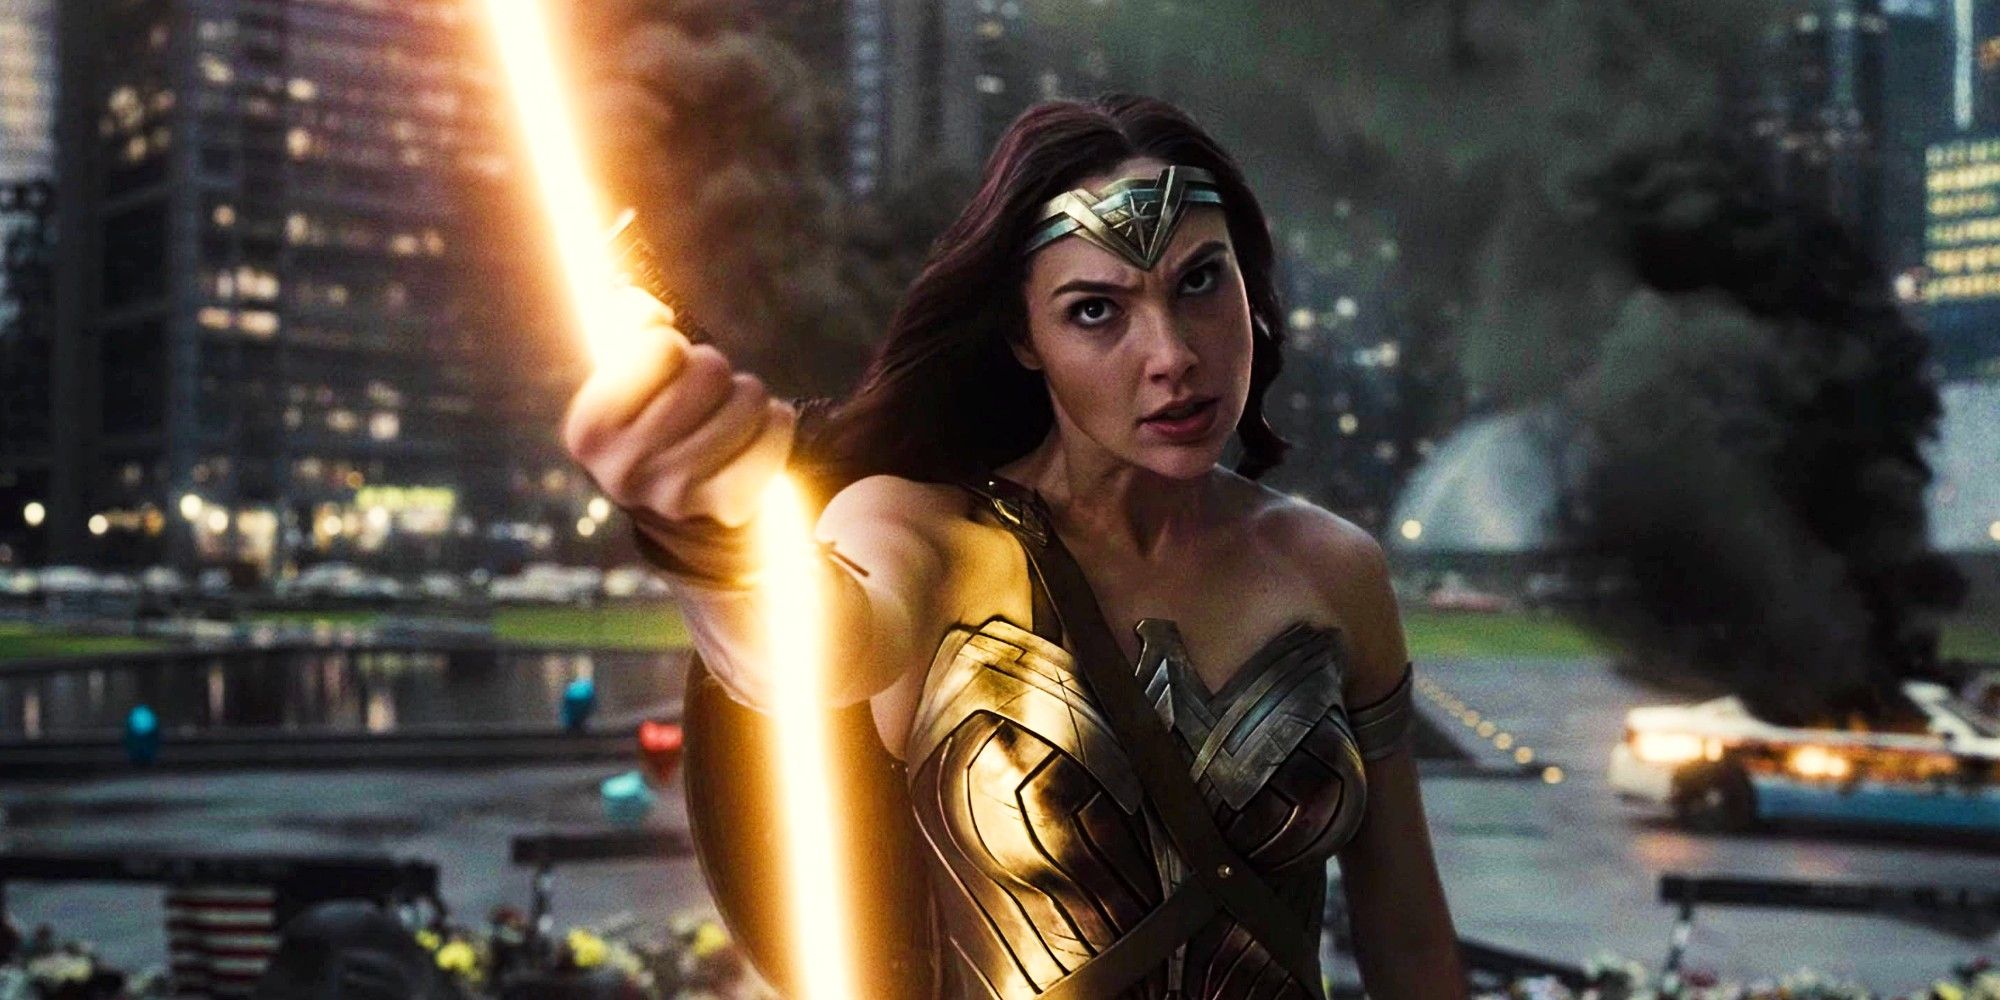 Gal Gadot as Wonder Woman wielding the Lasso of Truth in Zack Snyder's Justice League